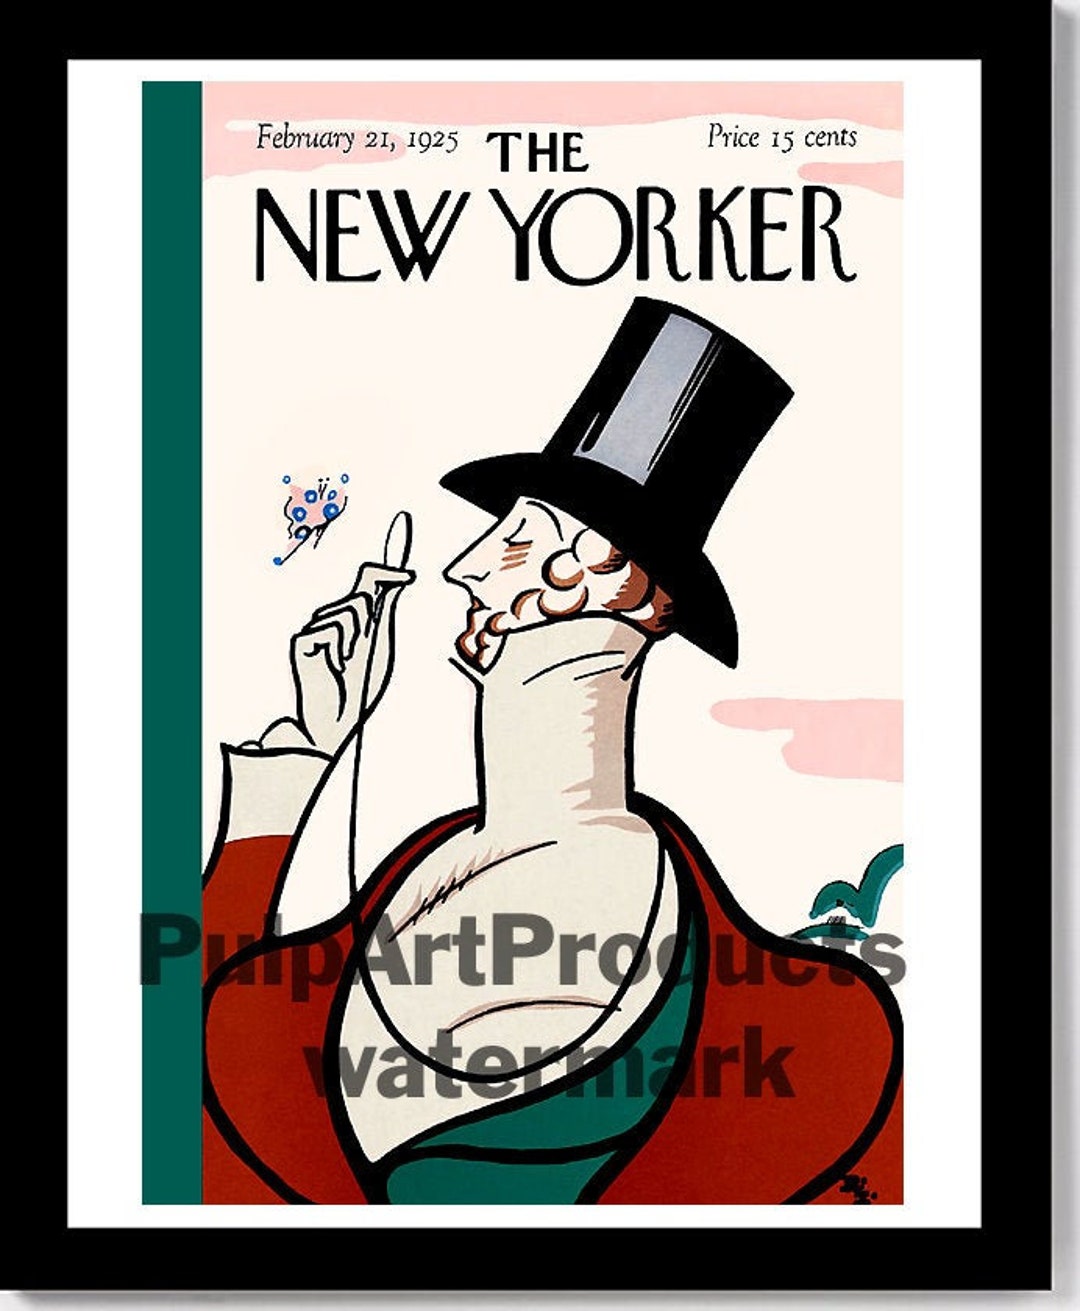 THE NEW YORKER first Issue Cover Poster - Etsy